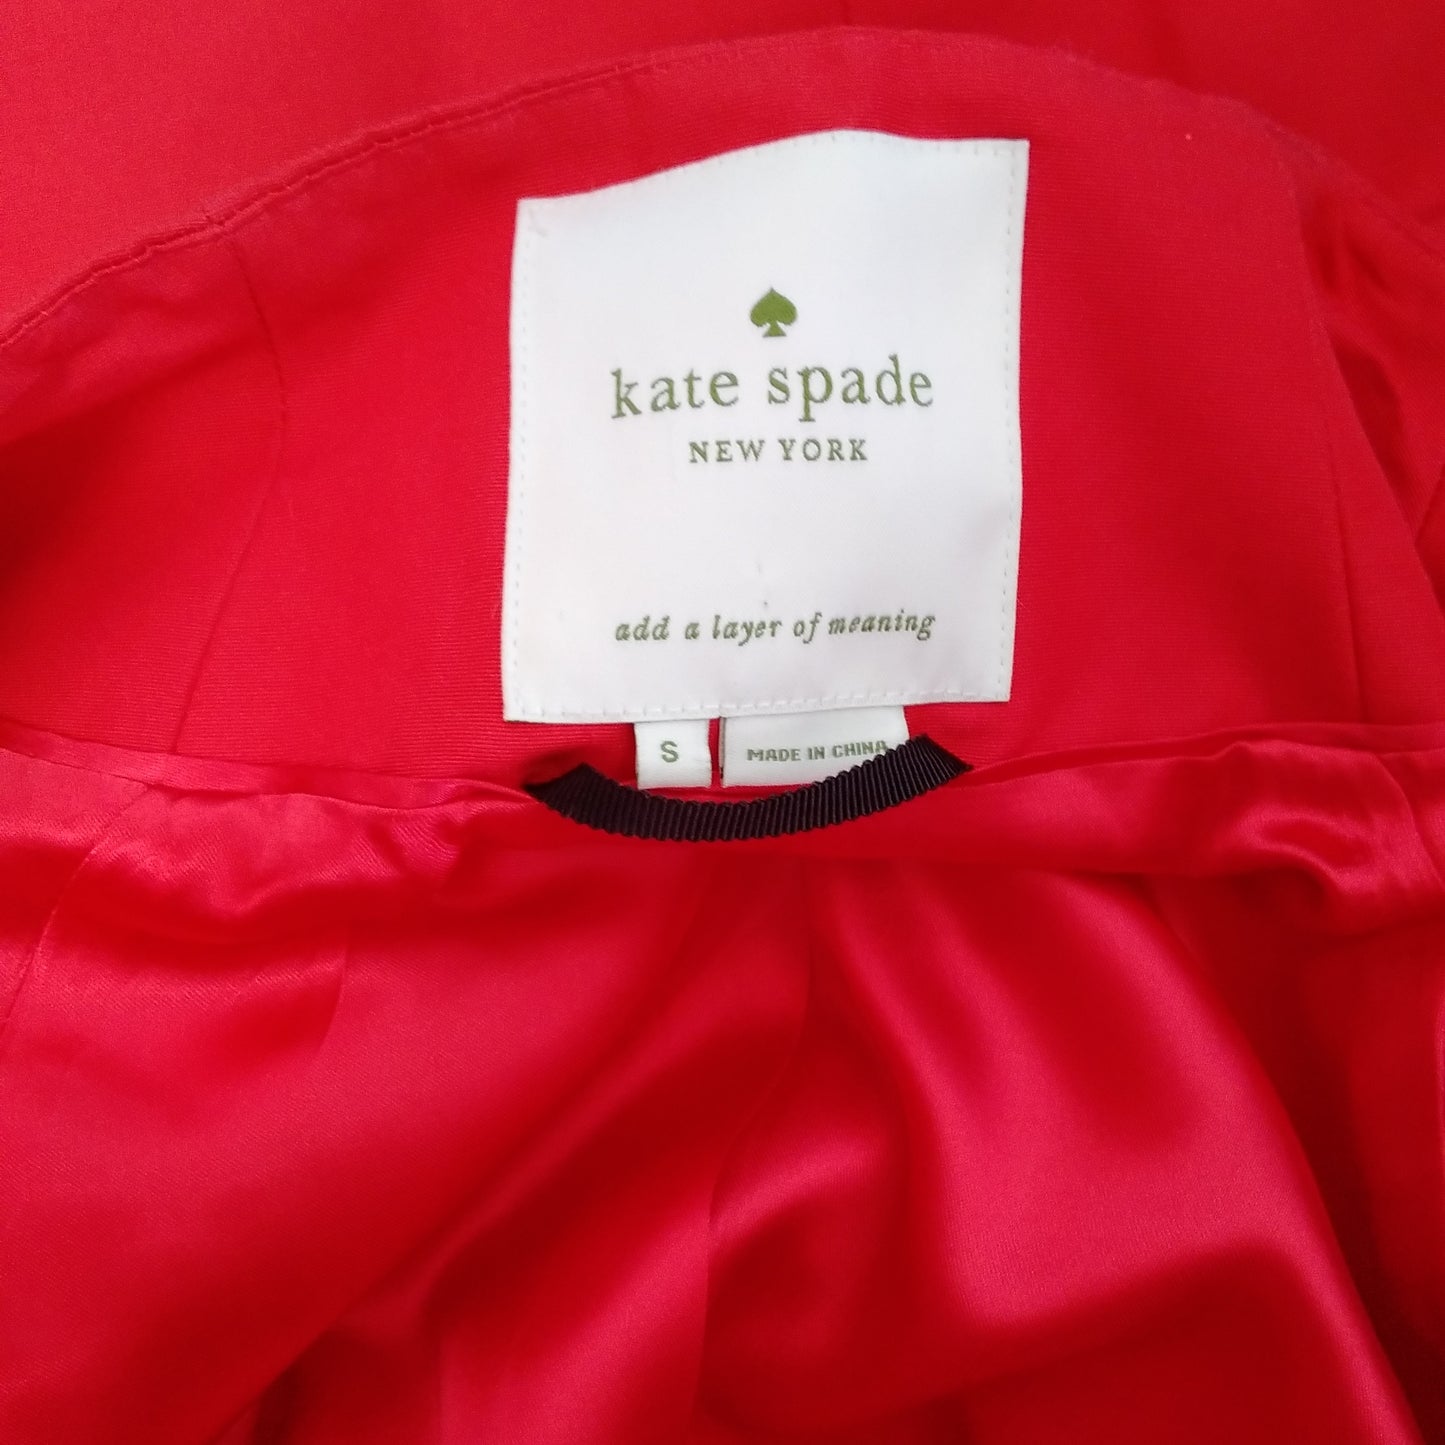 Kate Spade red Cotton Silk Blend Kendall Coat - S (missing bow)